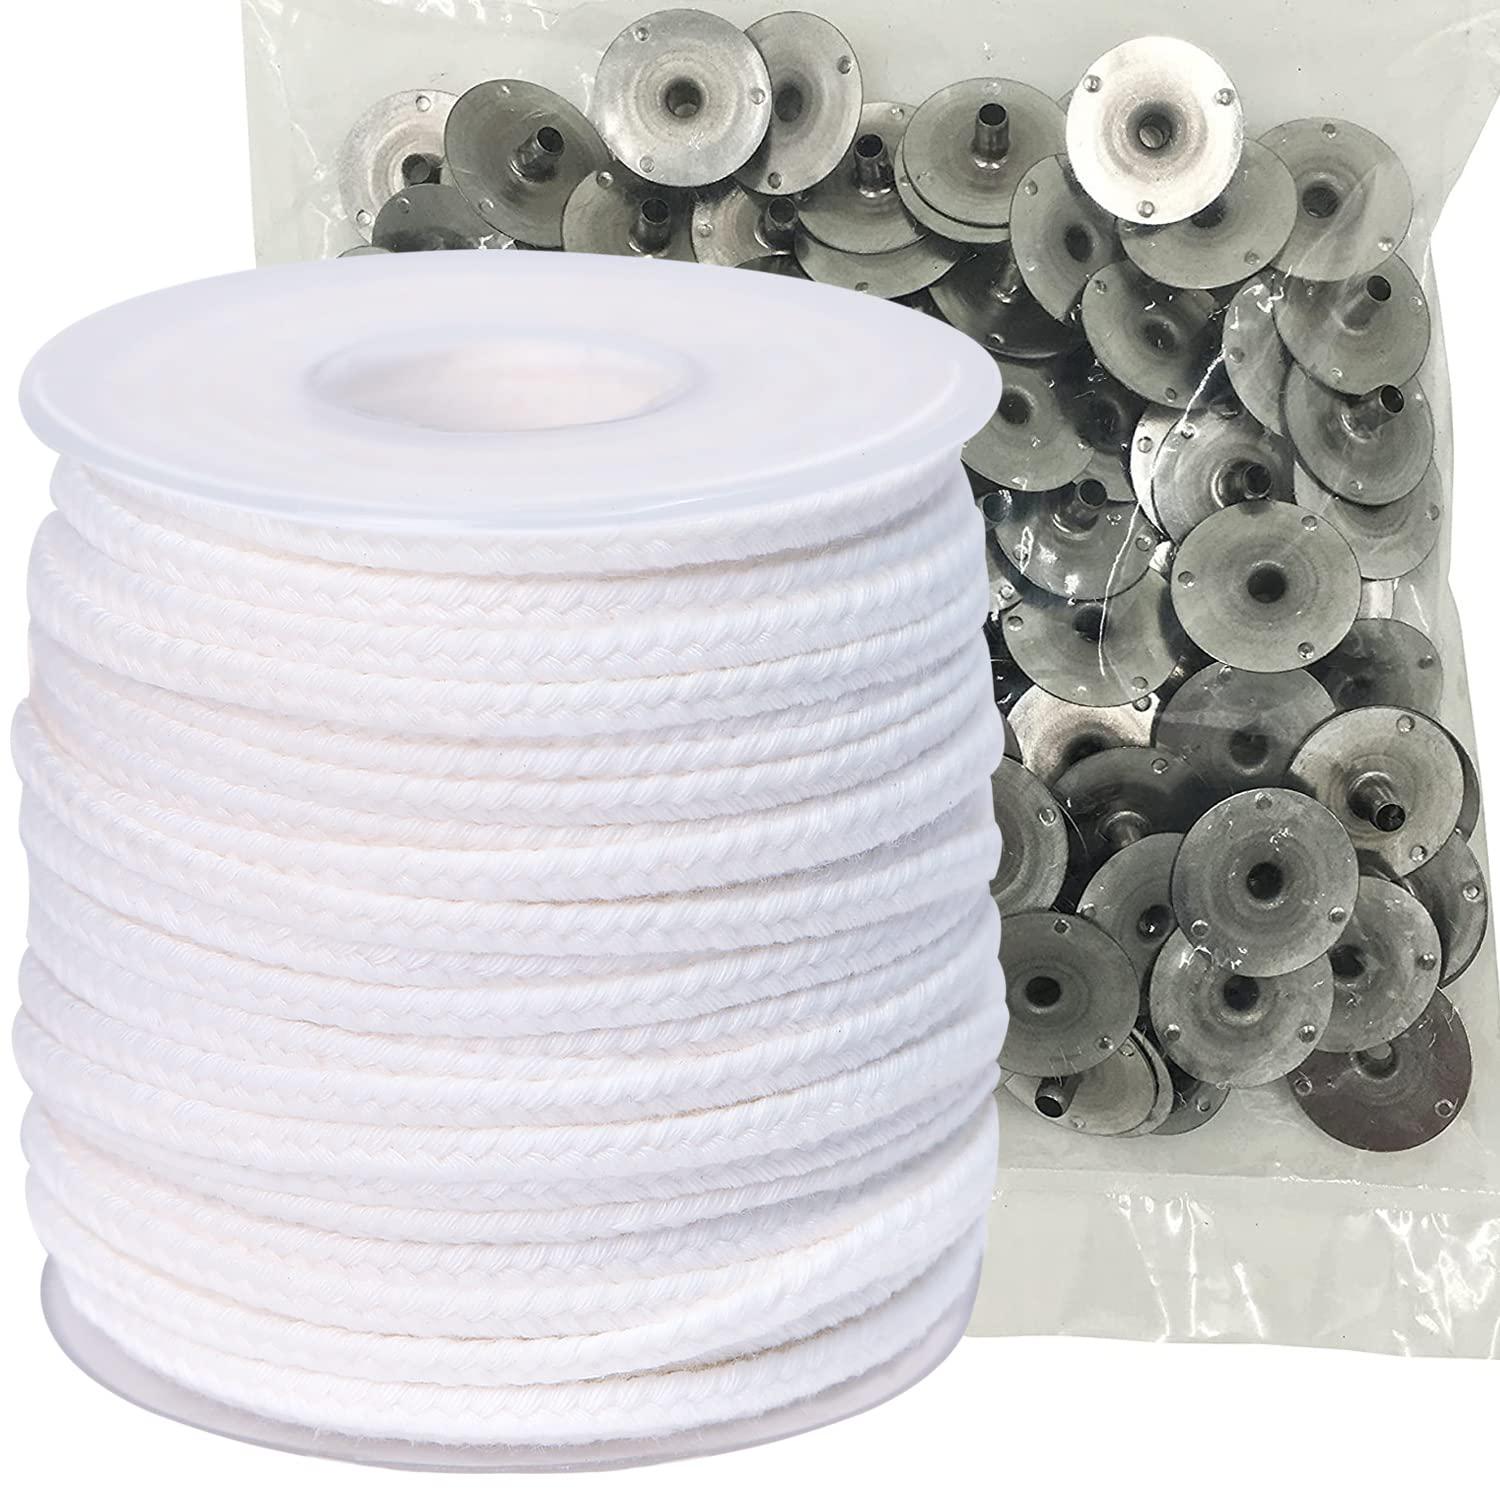 MadMedic braided cotton candle wicks bulk 200ft 24 ply for candle